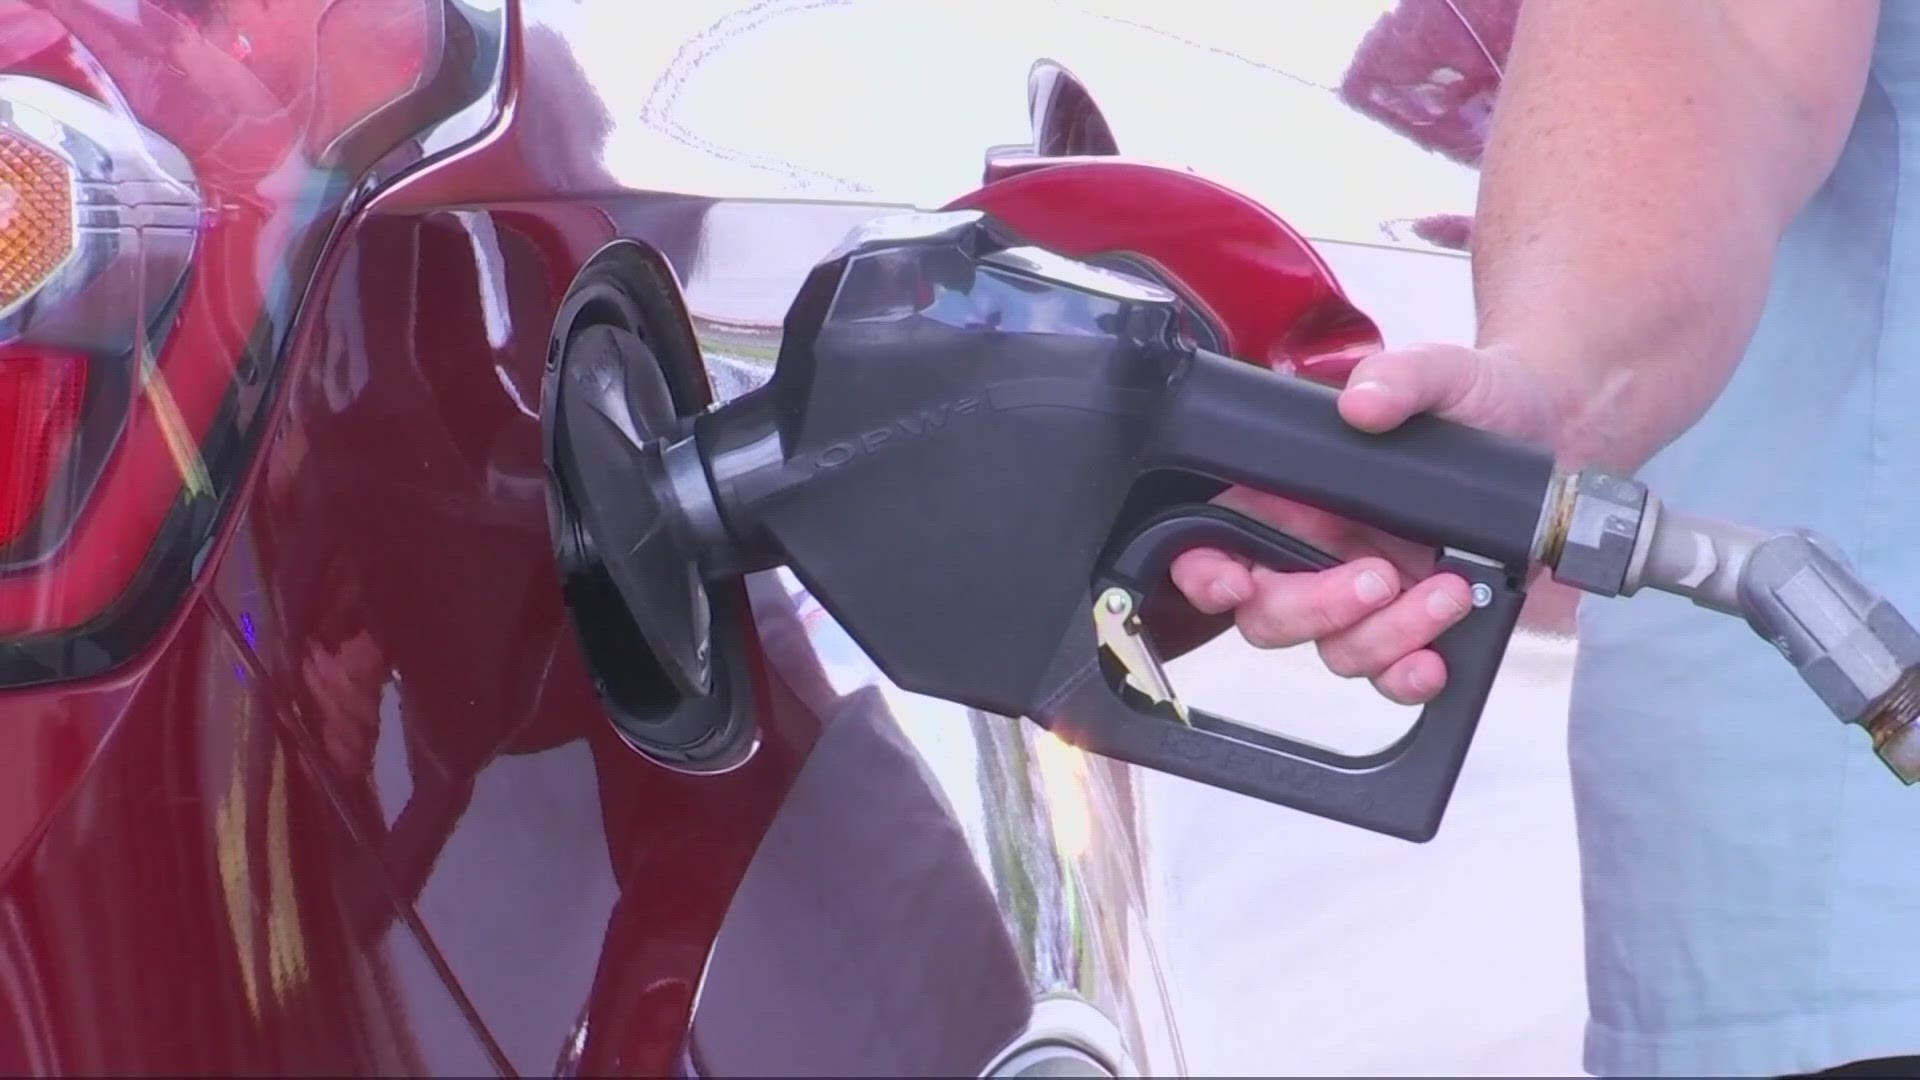 The average price of gas in Pennsylvania rose 19 cents since last month.